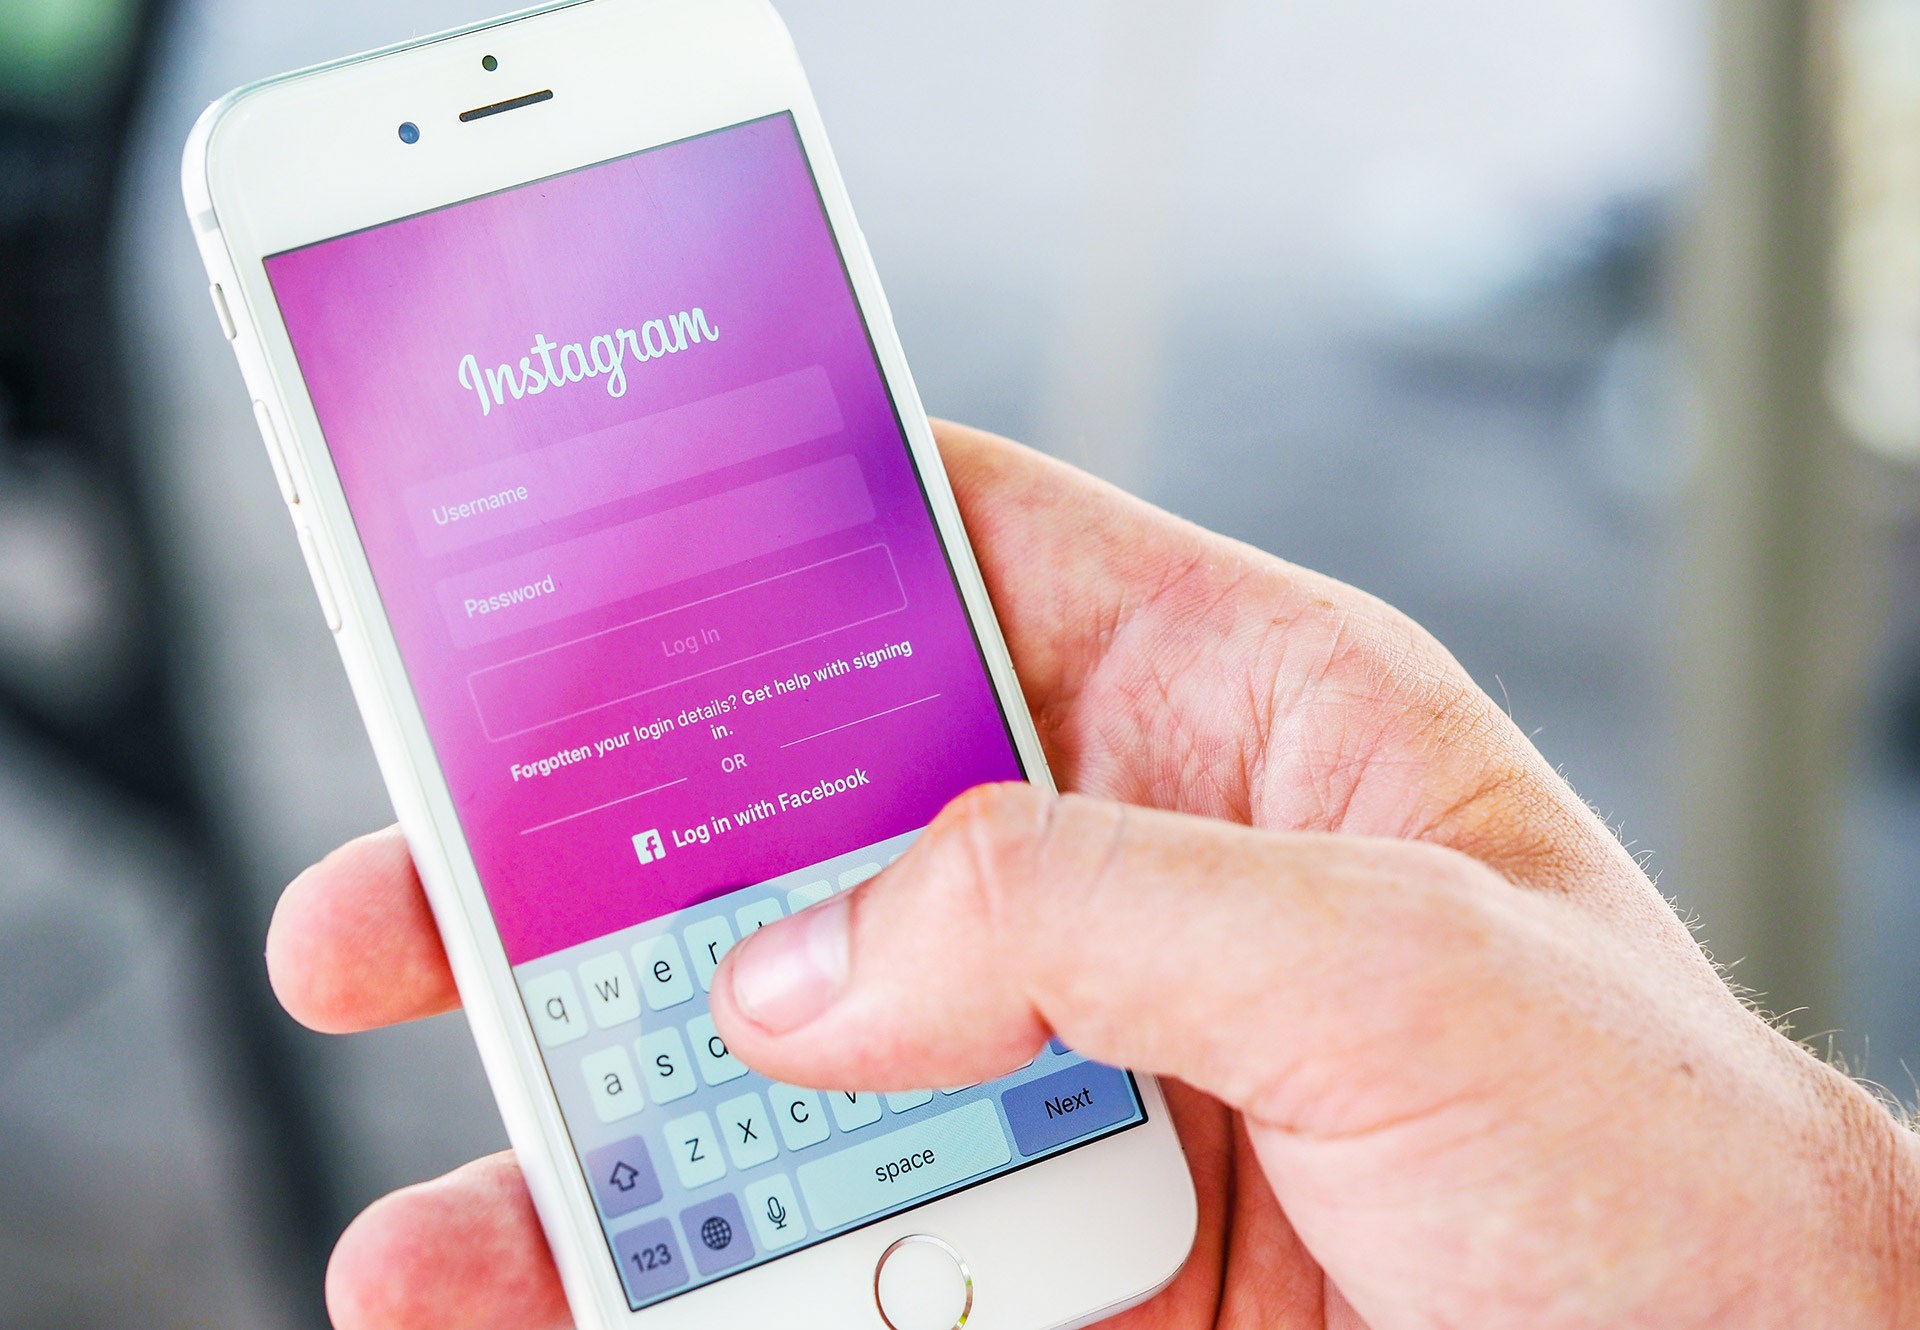 Should your business use Instagram?